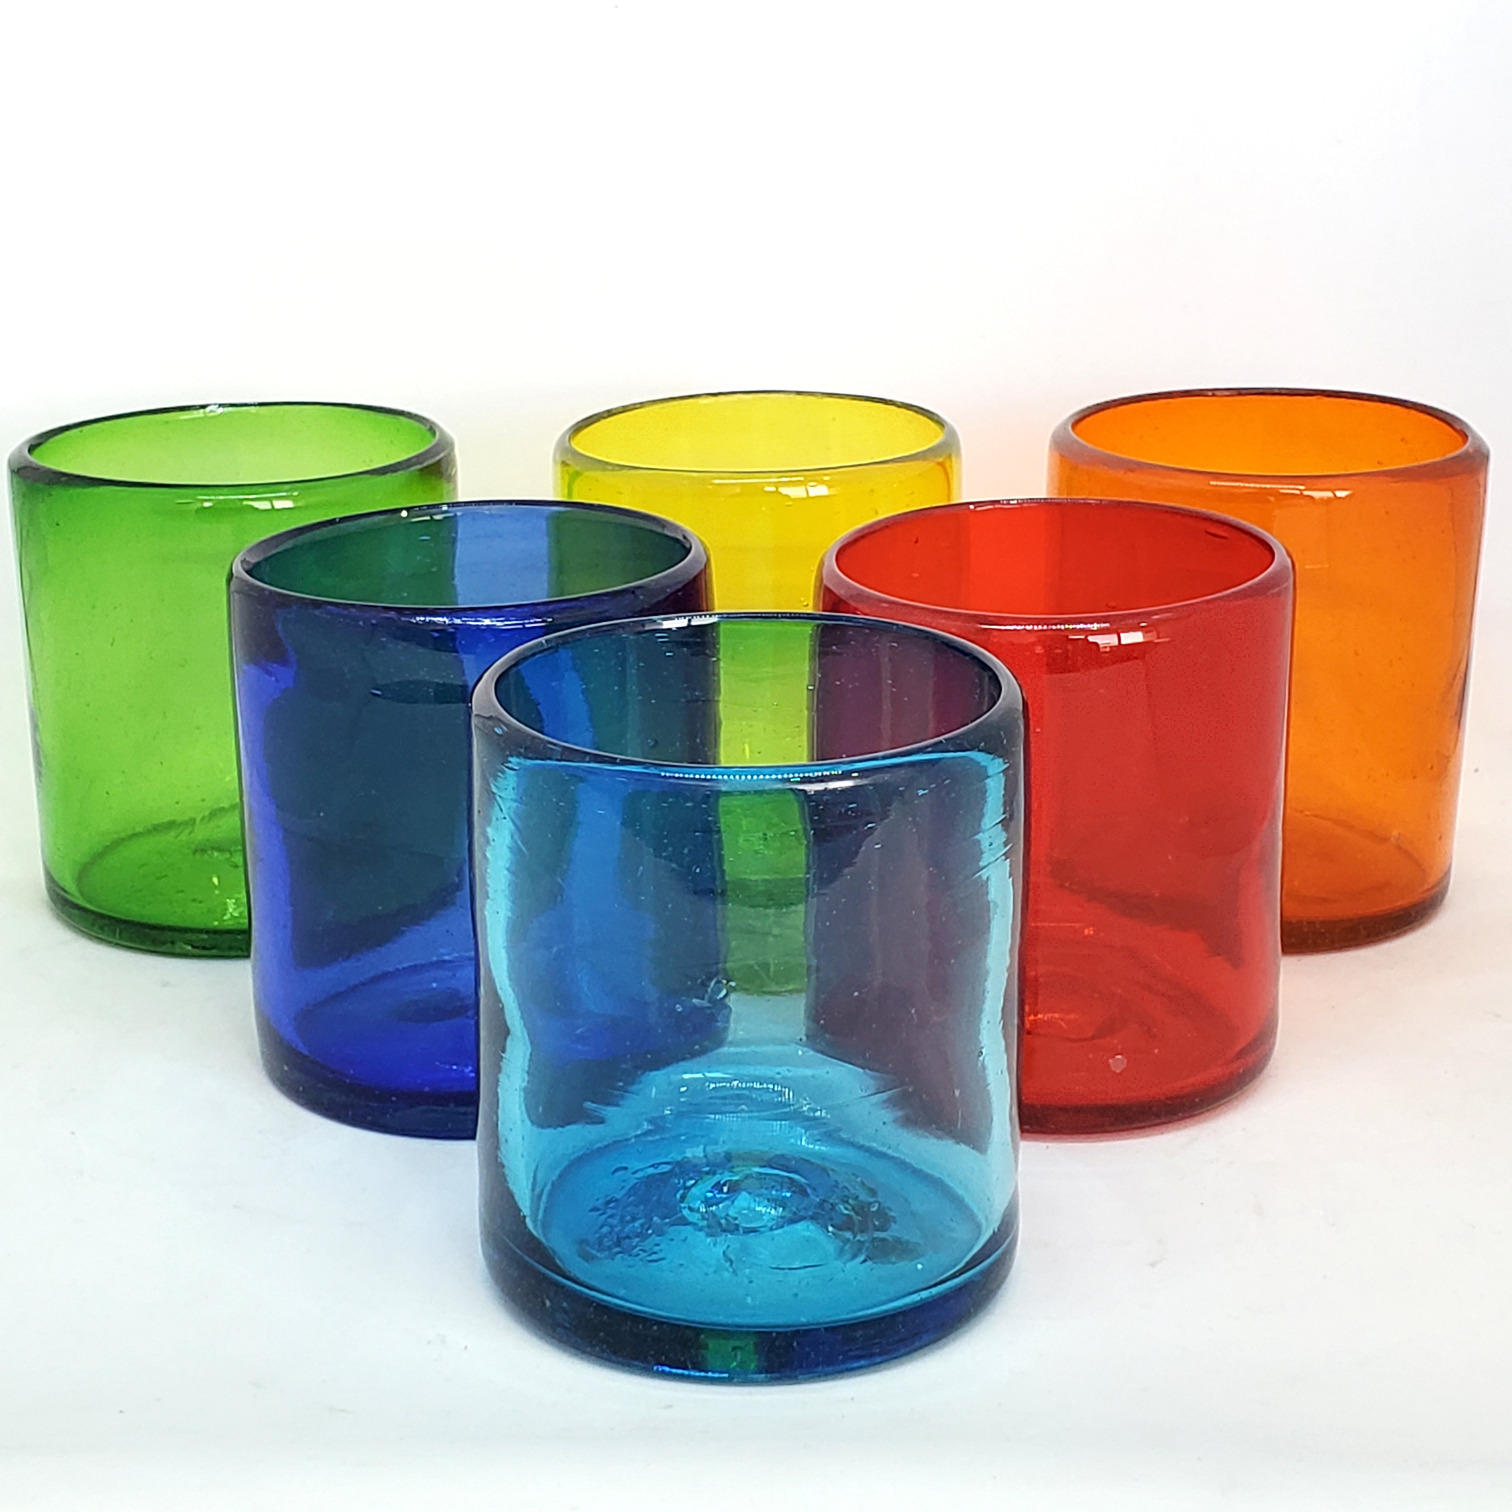 Mexican Glasses / Rainbow Colored 9 oz Short Tumblers (set of 6) / Enhance your favorite drink with these colorful handcrafted glasses.